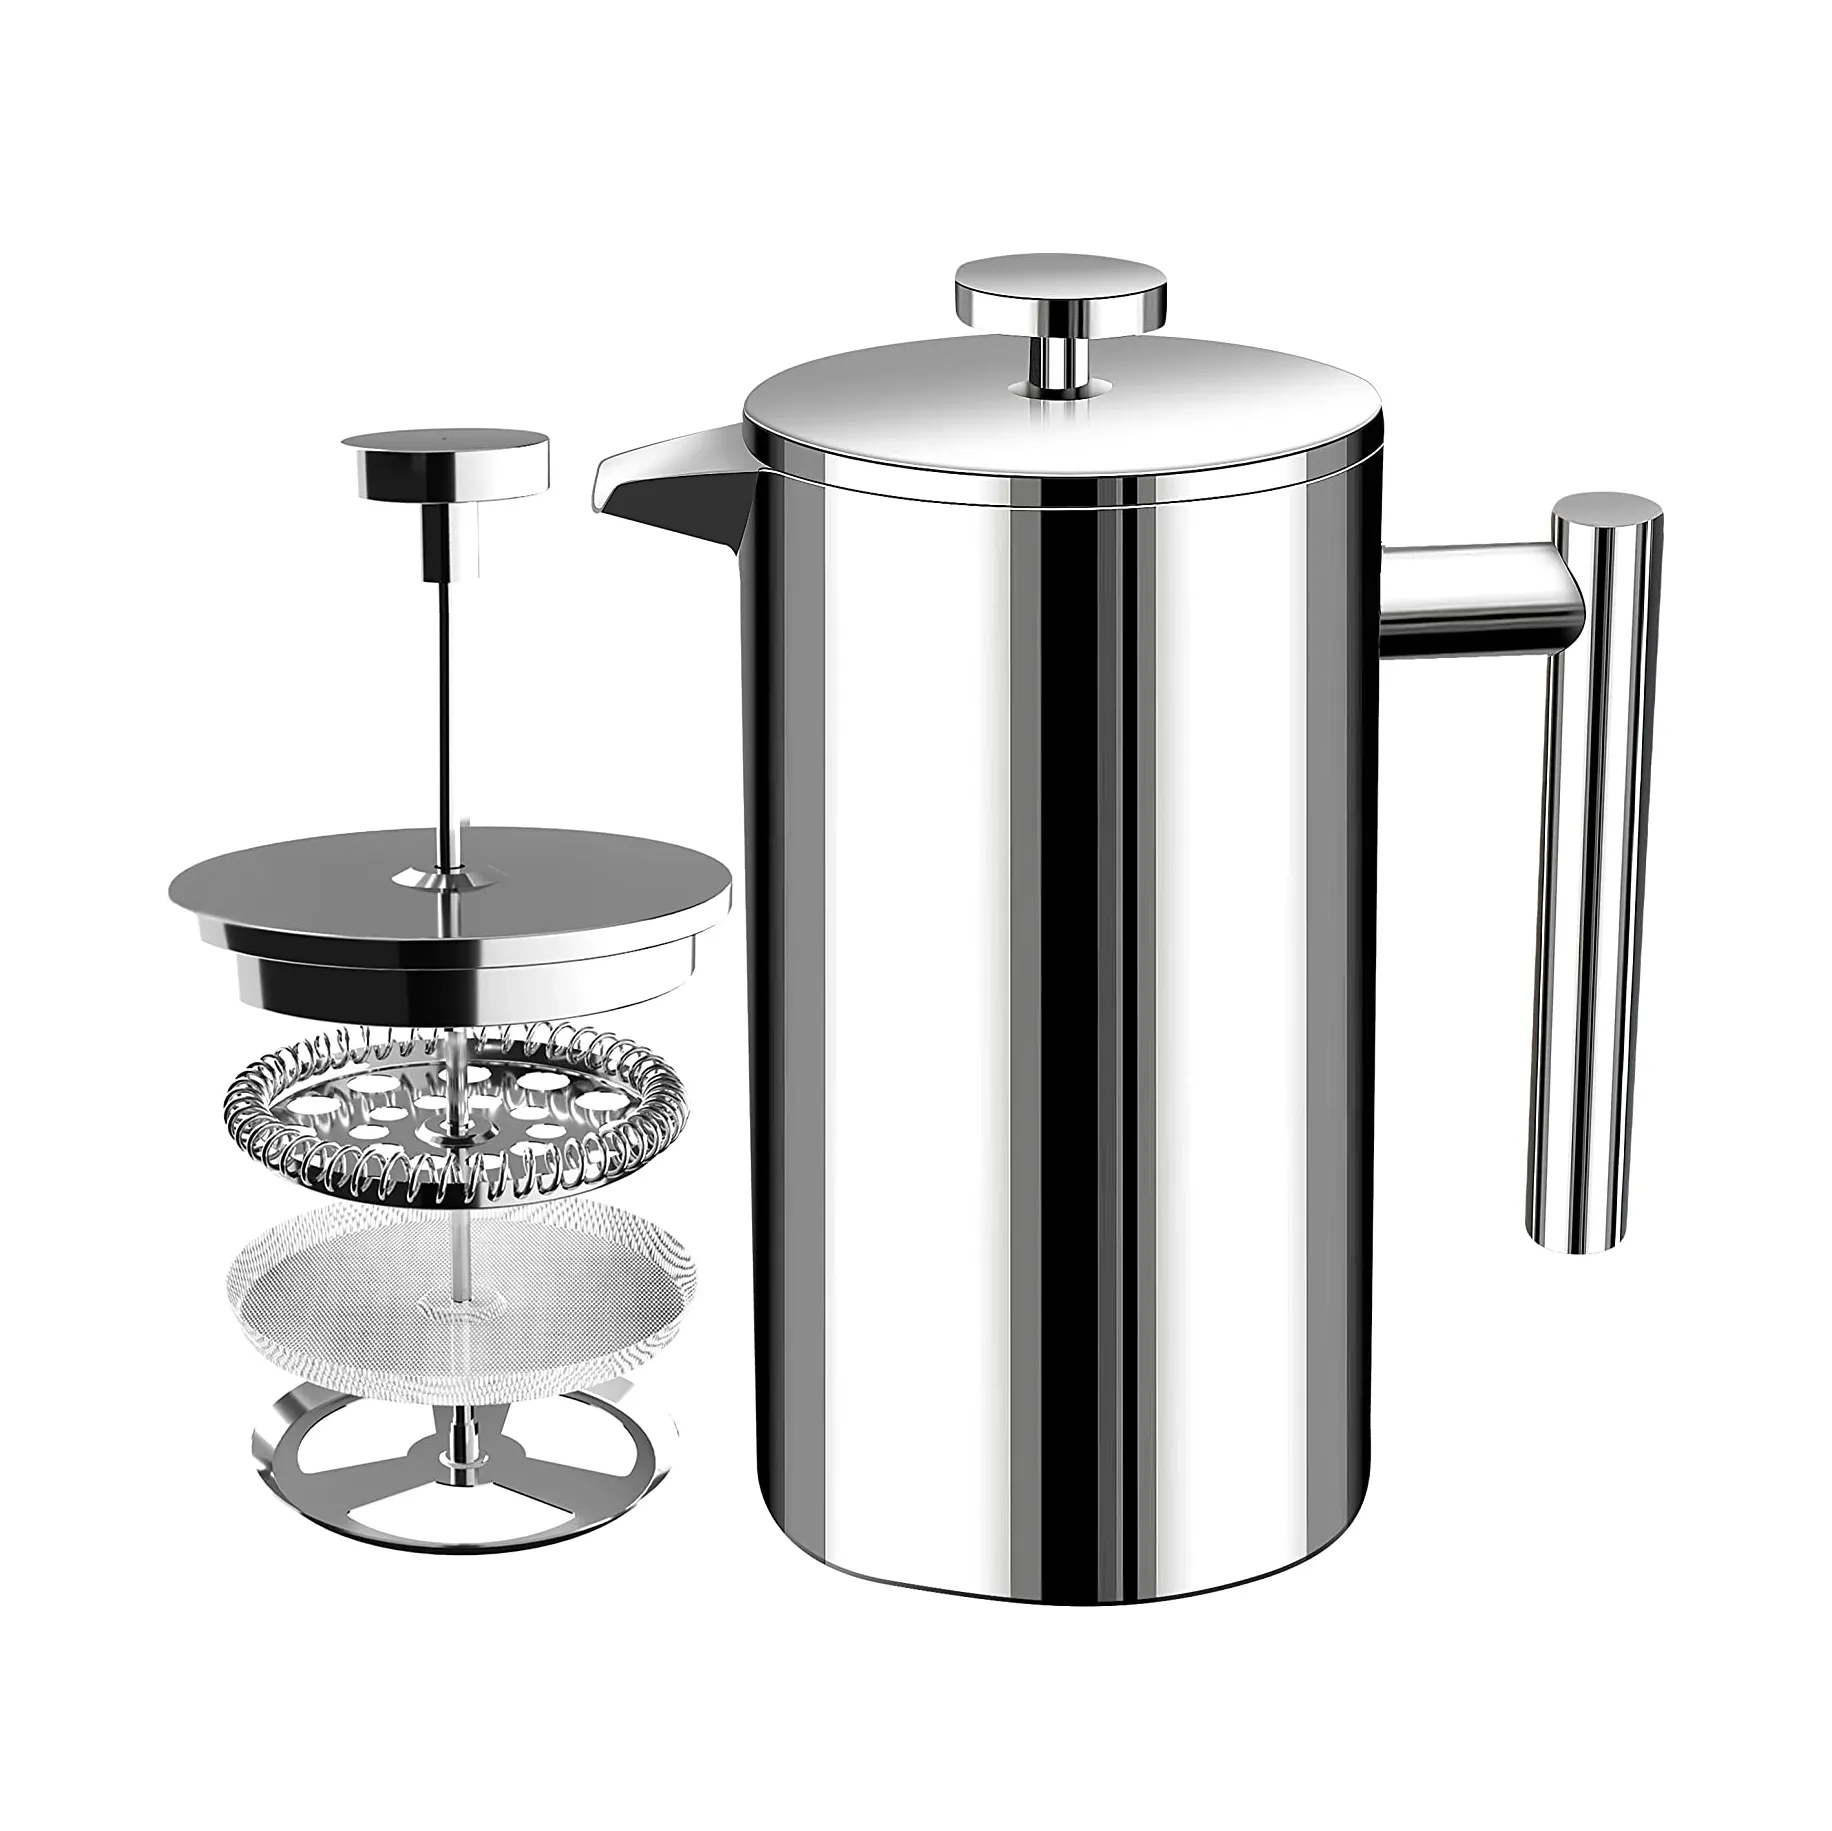 French Press Coffee Maker in 304 Double Walled Stainless Steel 8 Cups 34oz